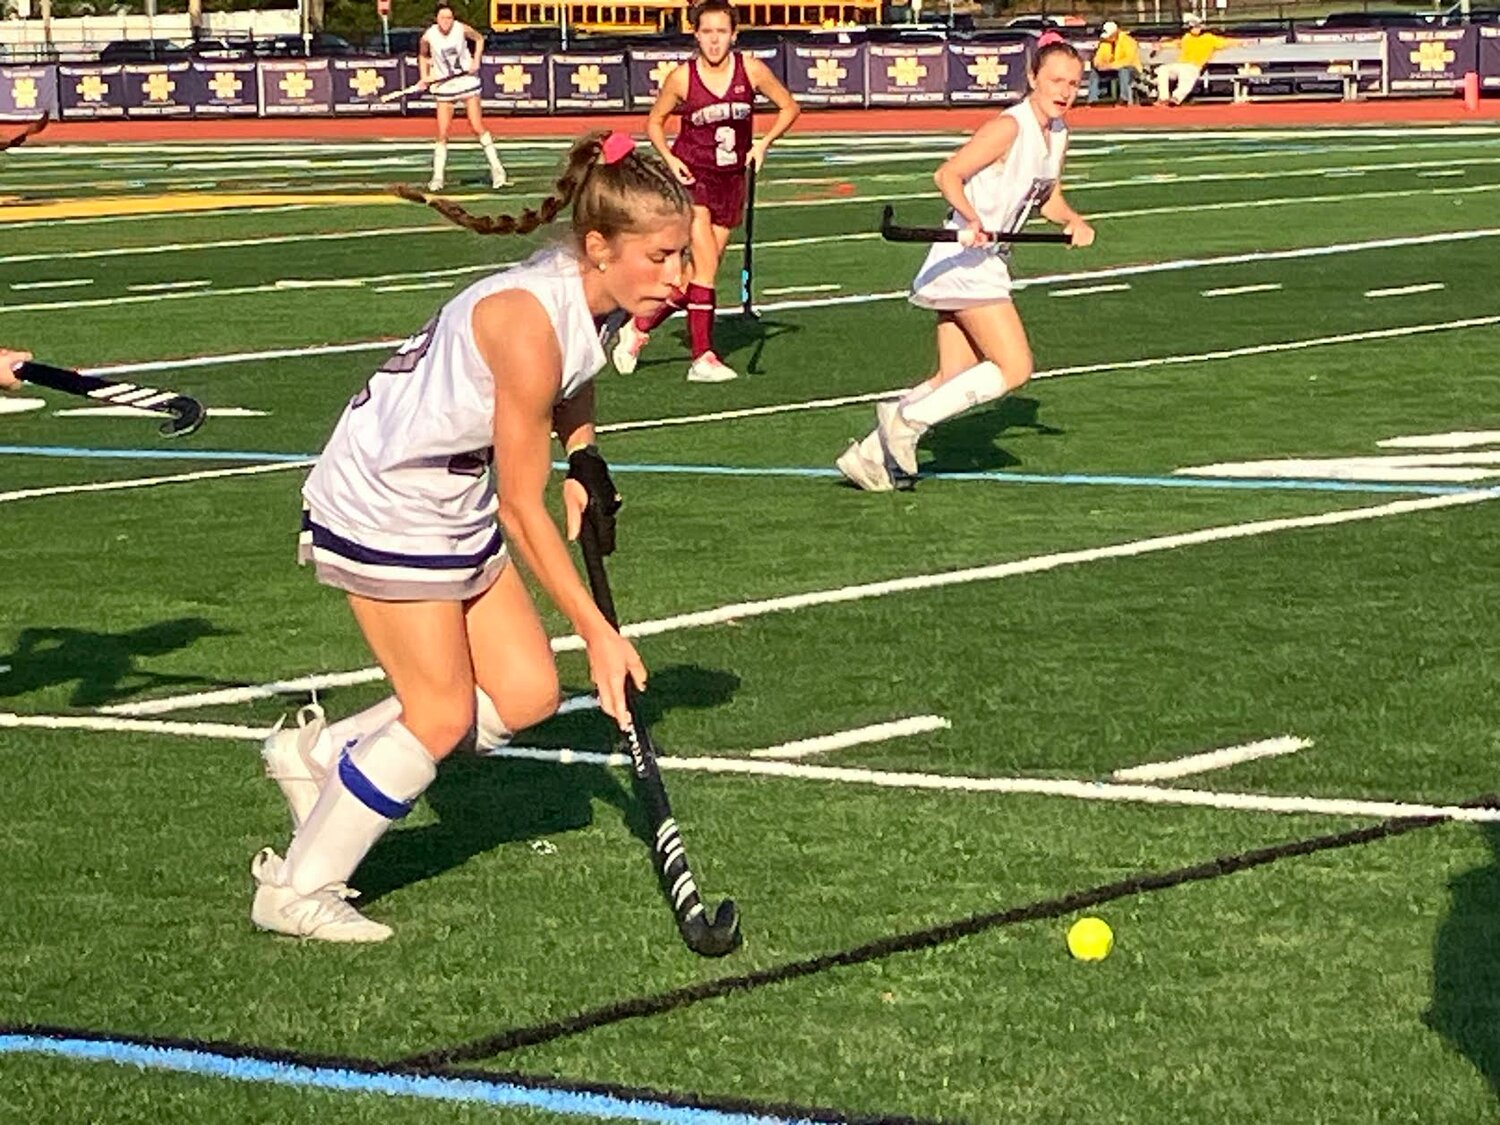 Midfielder Alexa Flood brings the ball up the field against Garden City in the Long Island Championship game on Nov. 5. Flood was named to the all-tournament team.